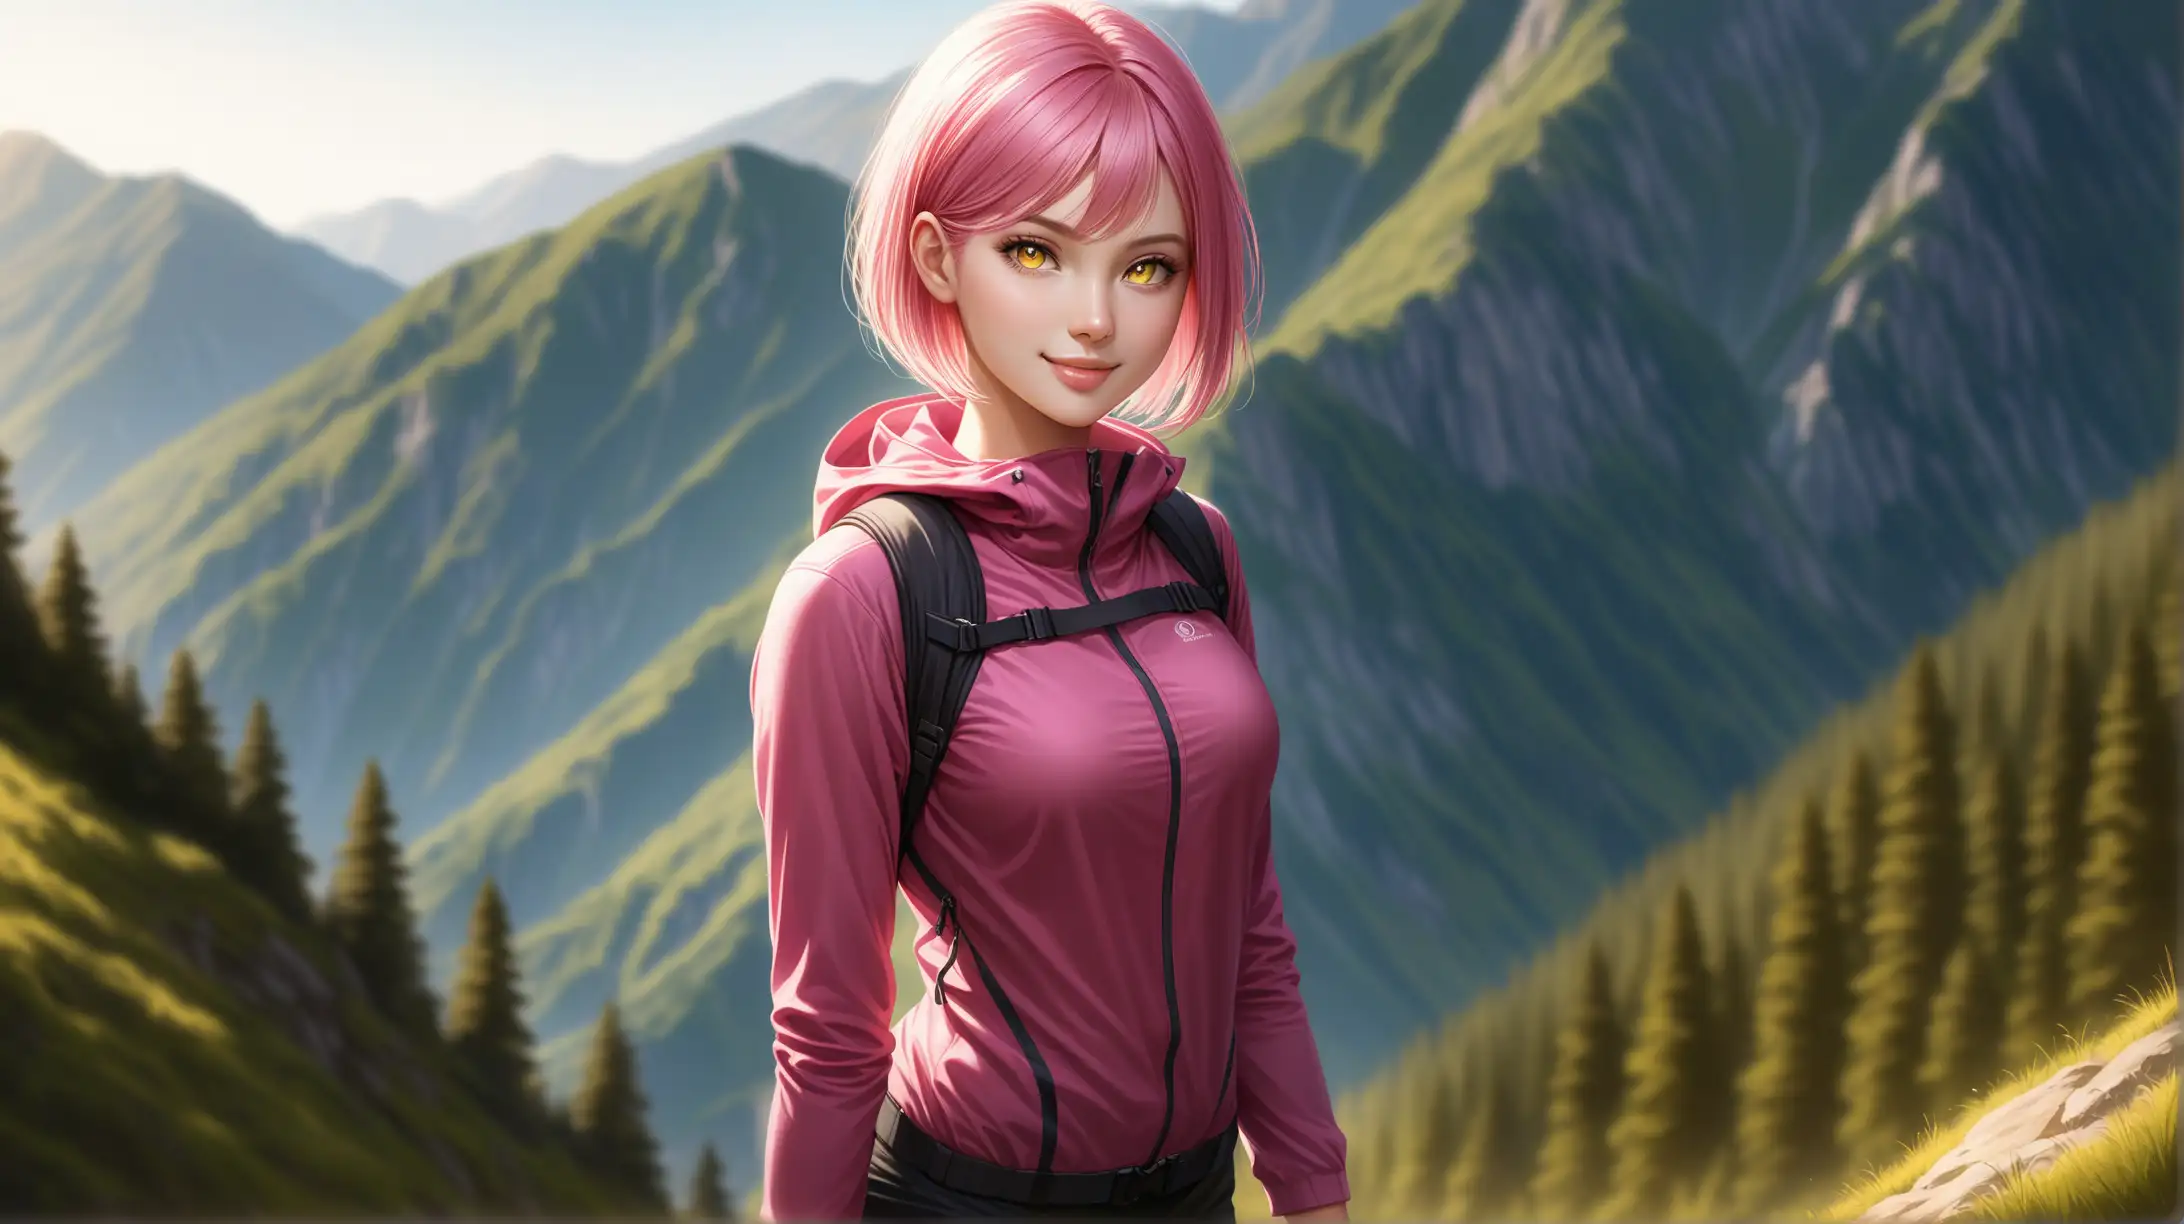 Seductive Woman with Pink Hair in Hiking Outfit Smiling Outdoors